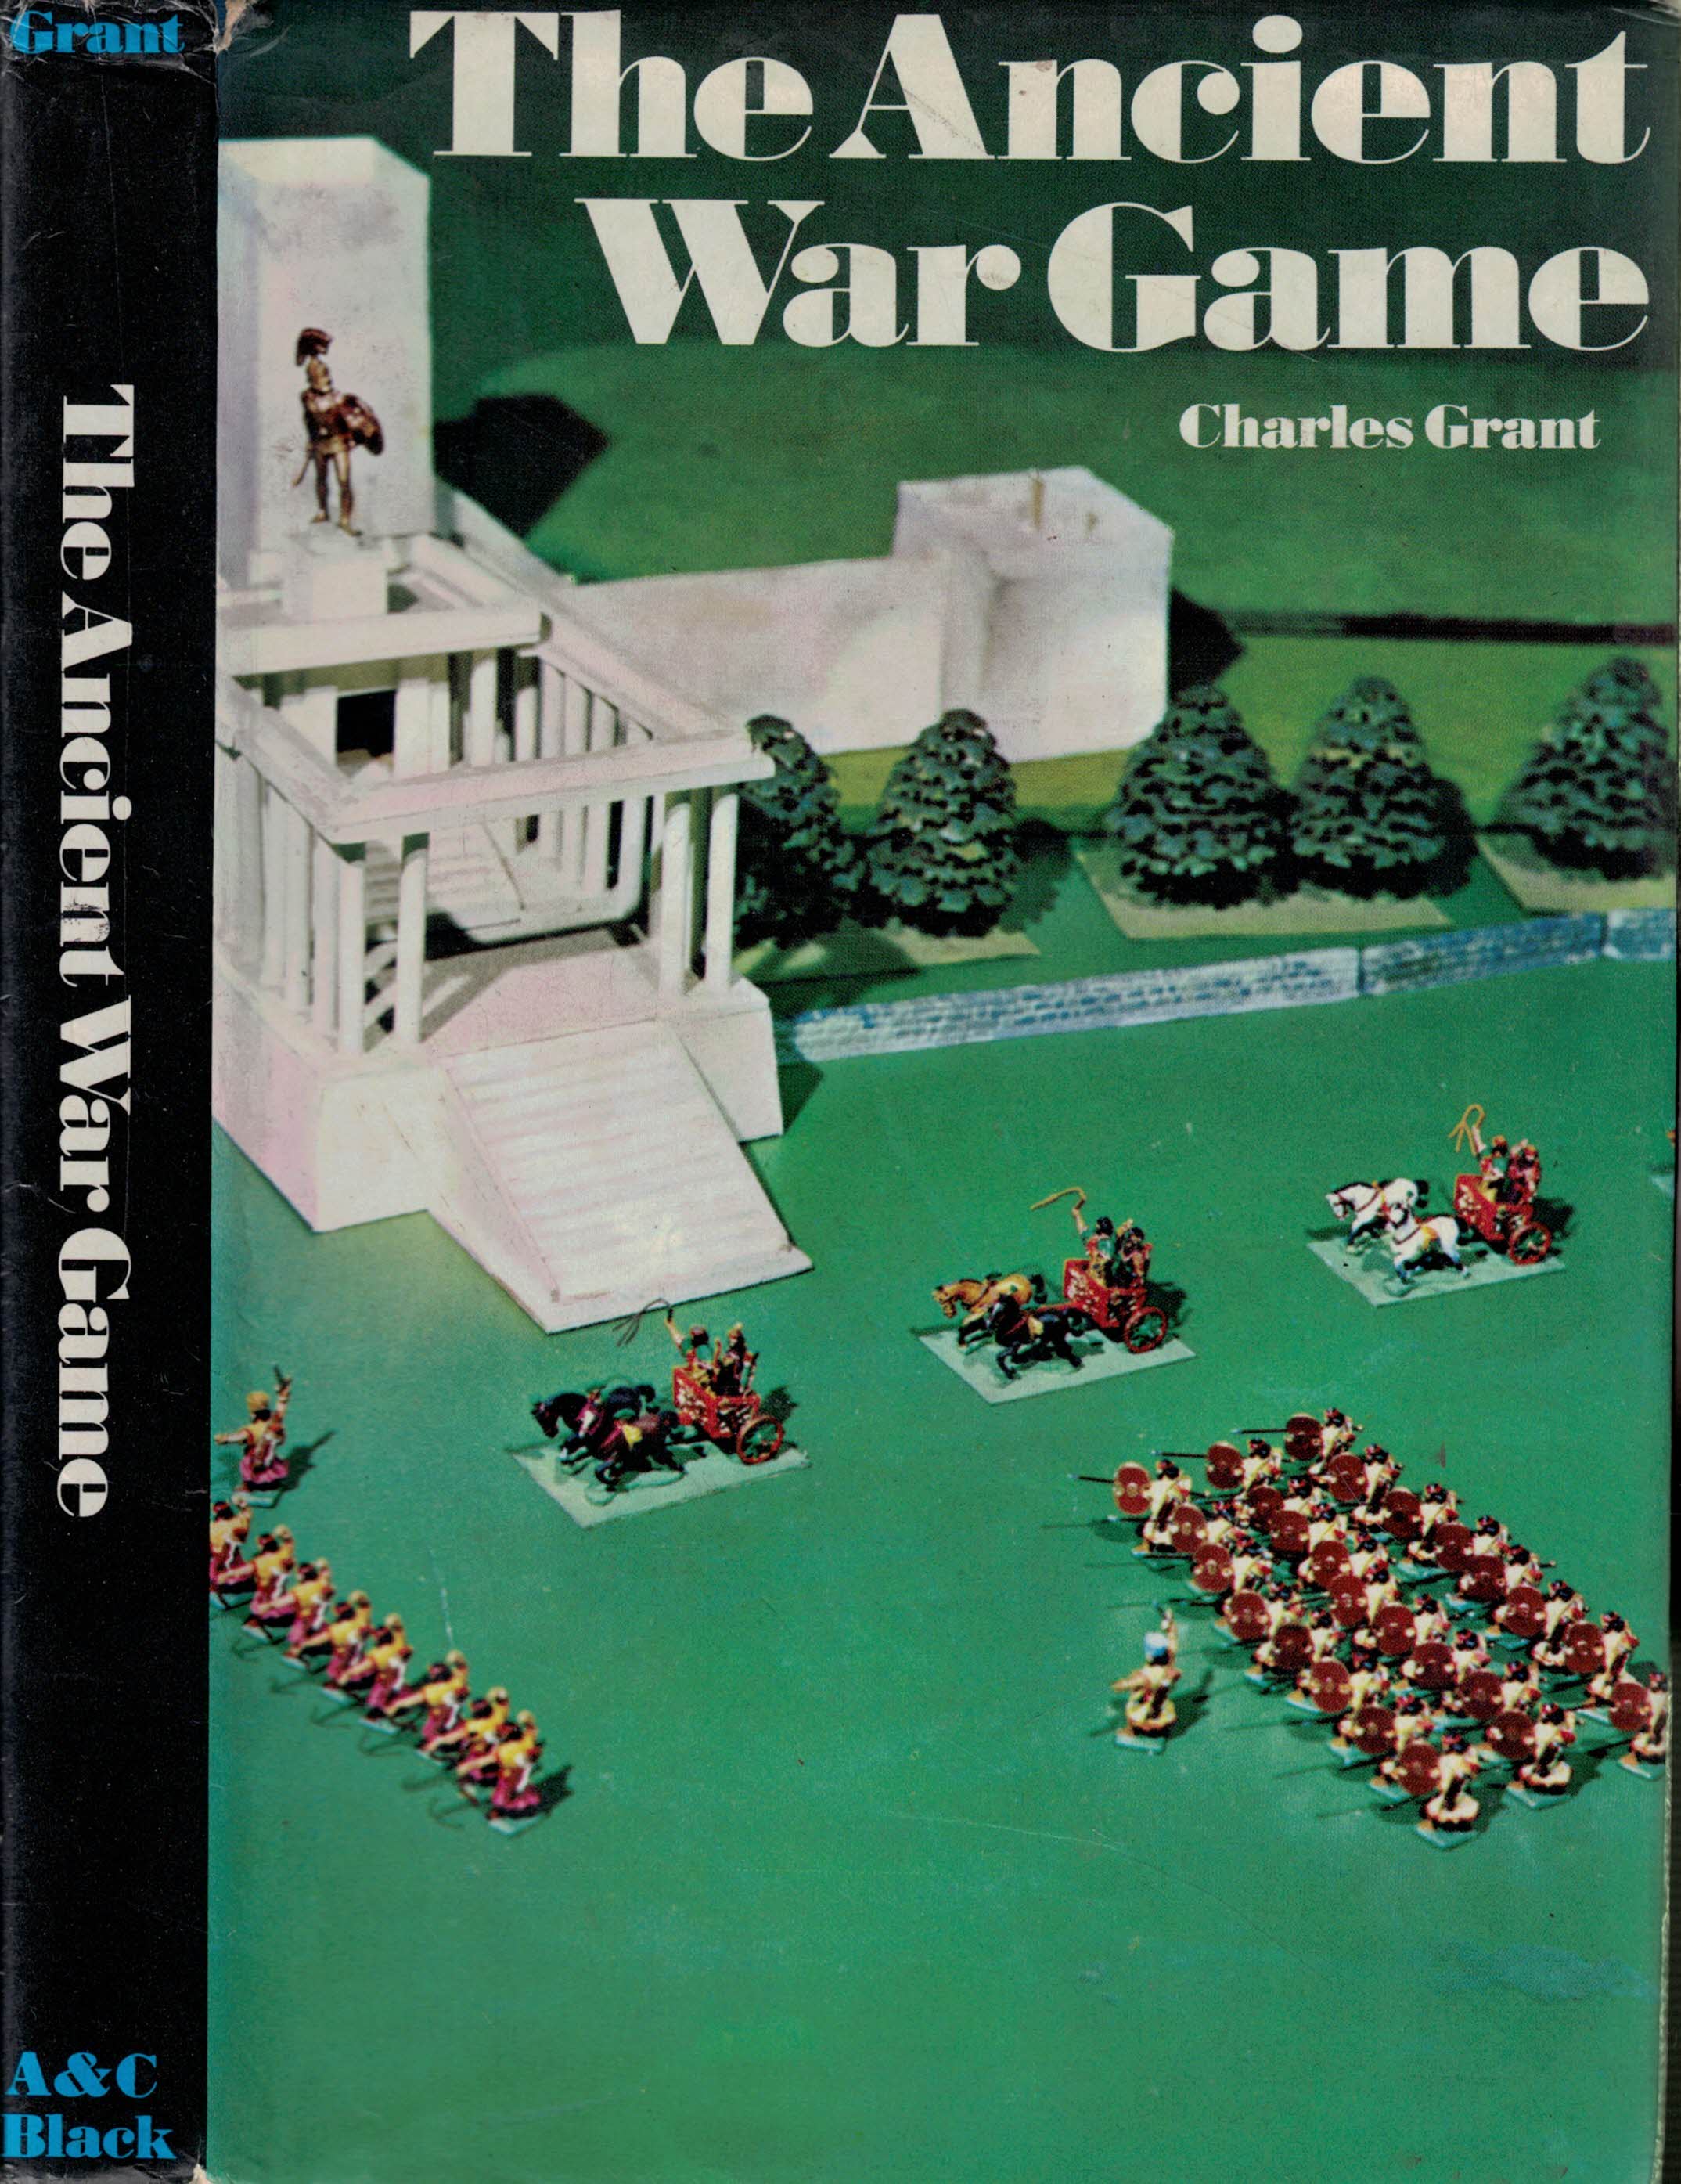 The Ancient War Game